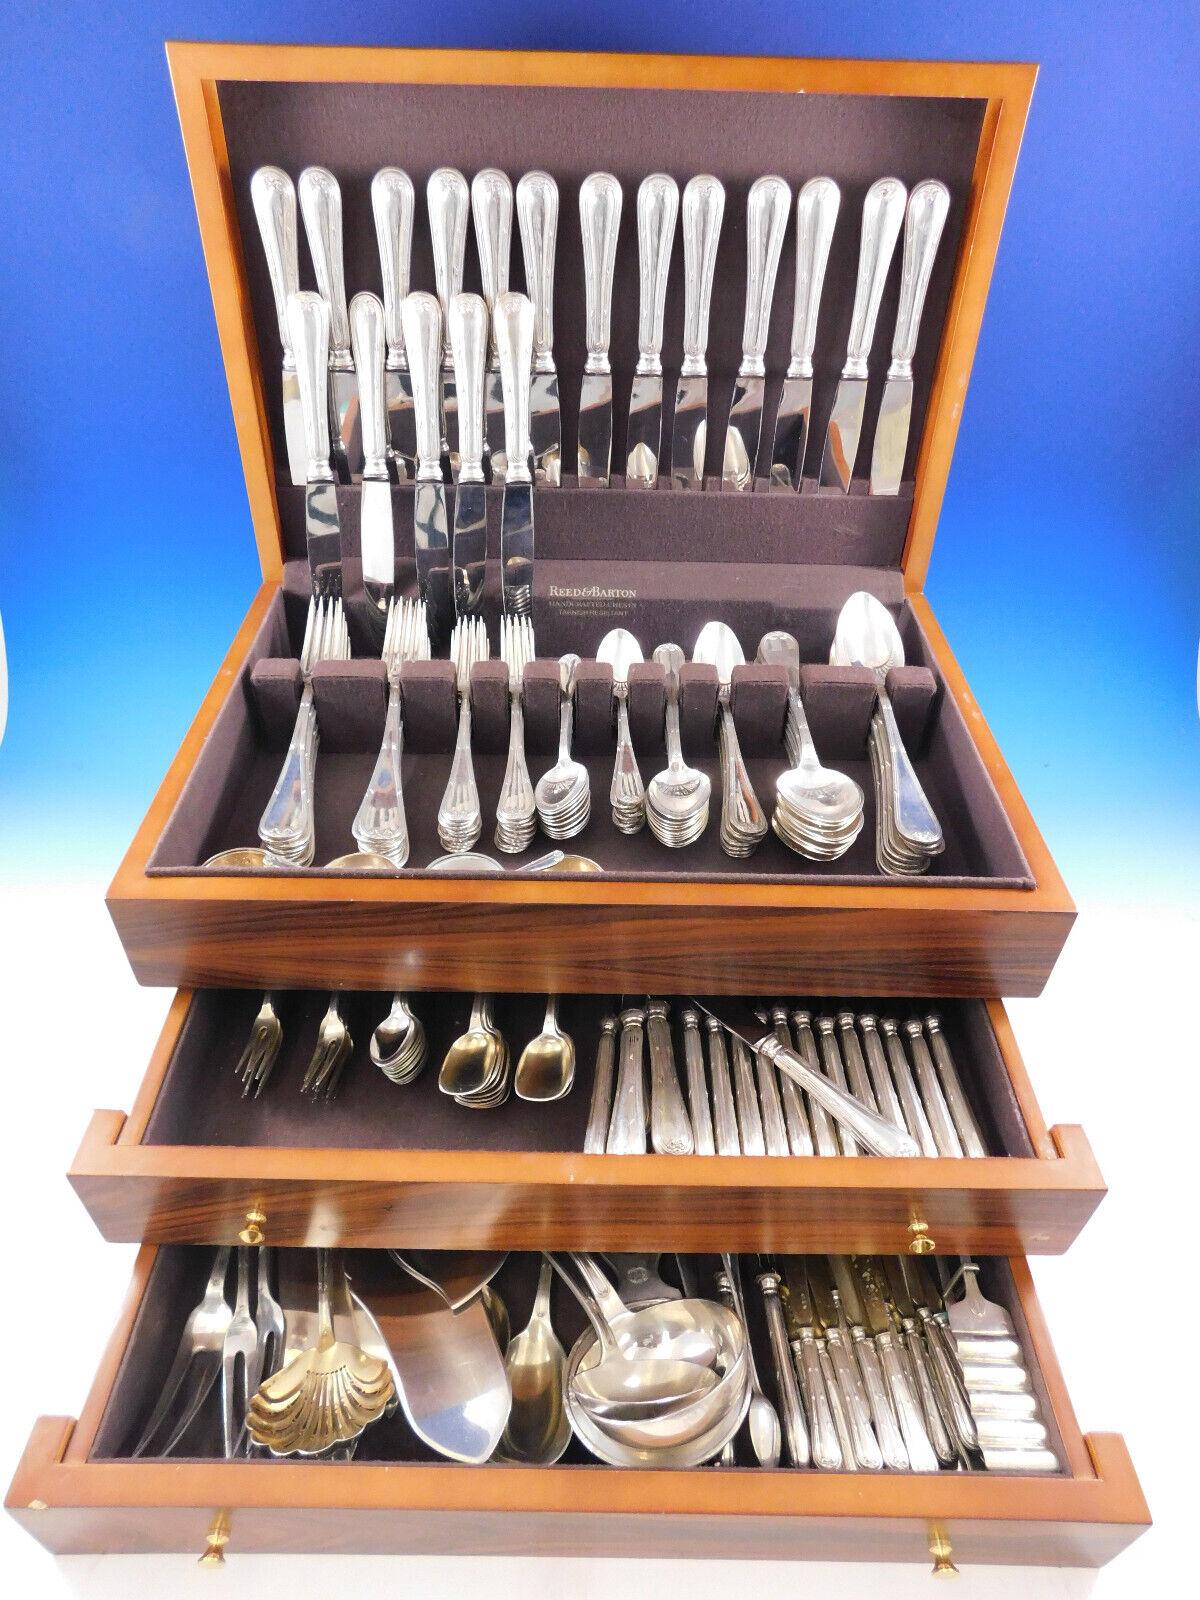 Monumental Austrian 800 silver flatware set by Jarosinski & Vaugoin with bow and ribbon design - 211 pieces. Hallmarks for Austria-Vienna, post 1922. Jarosinski & Vaugoin have been makers of fine silver for 6 generations. In 1928 they became